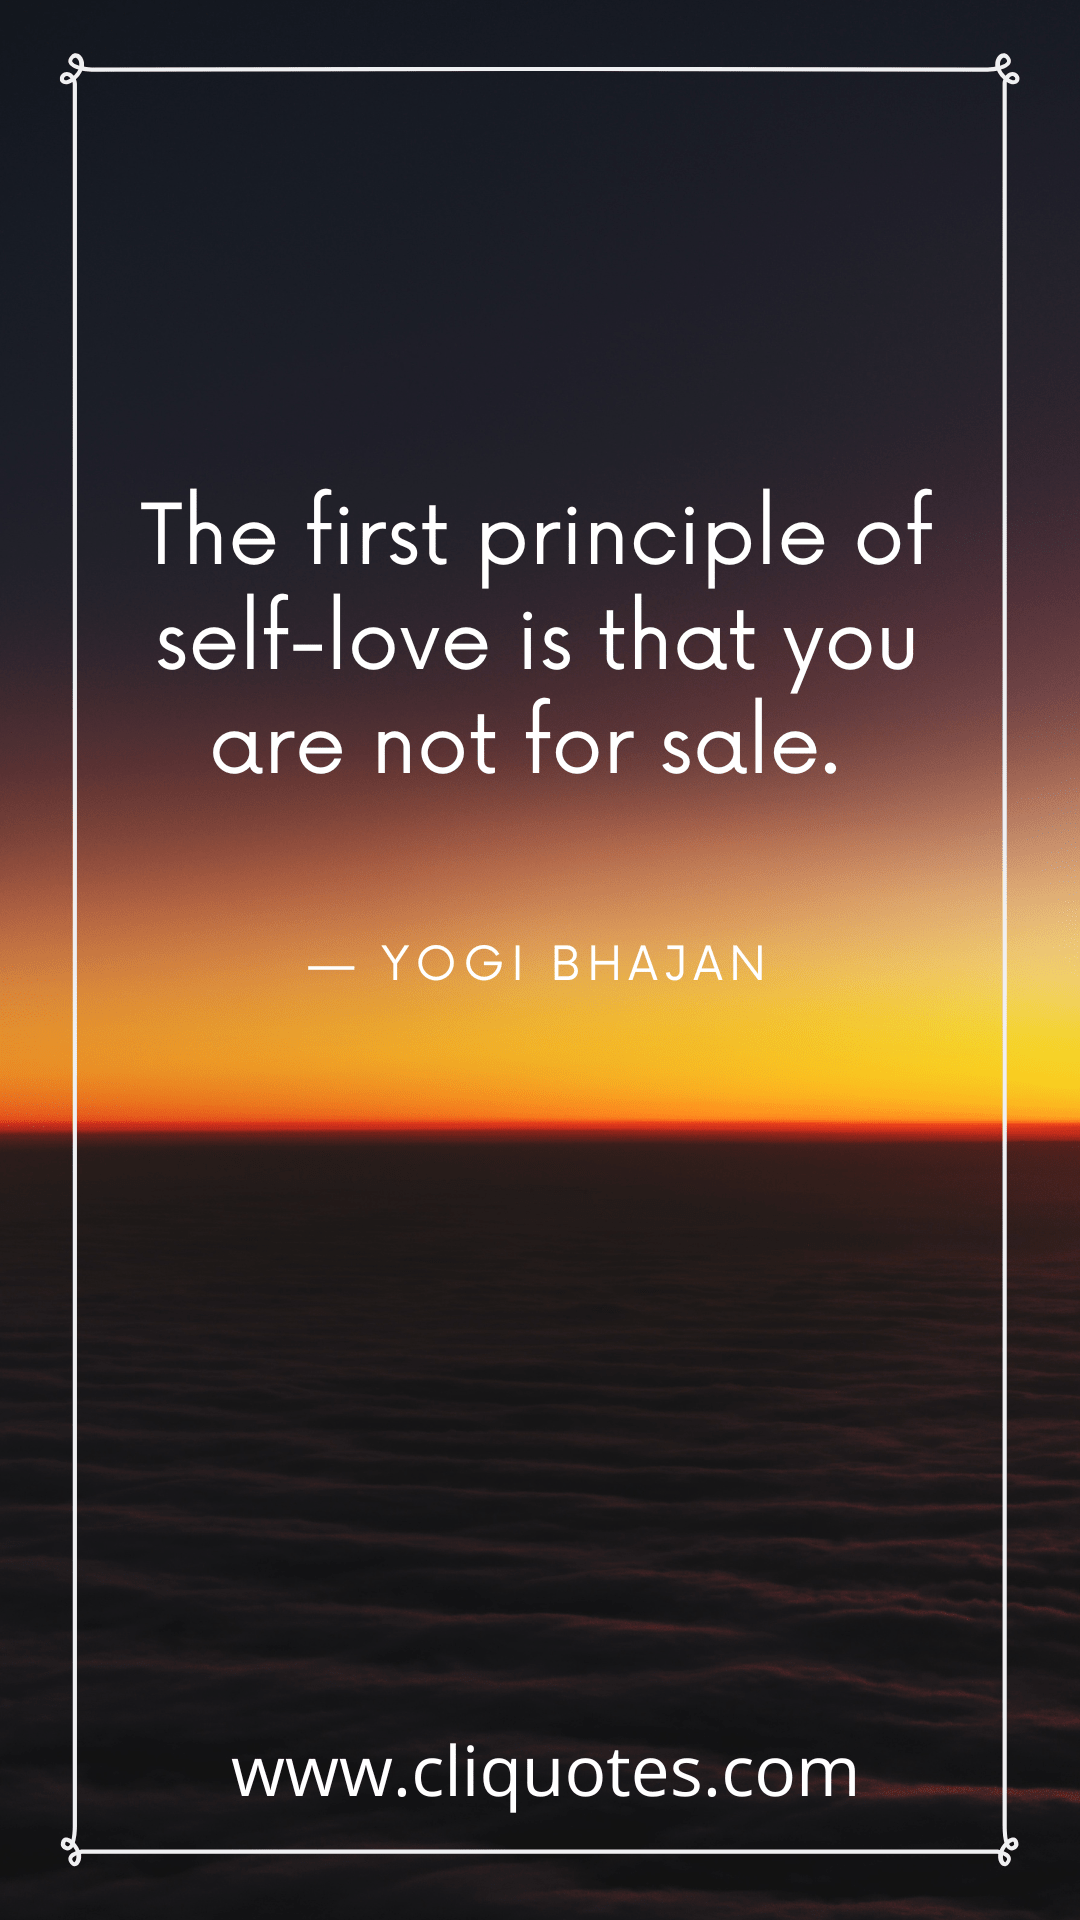 The first principle of self-love is that you are not for sale. — YOGI BHAJAN